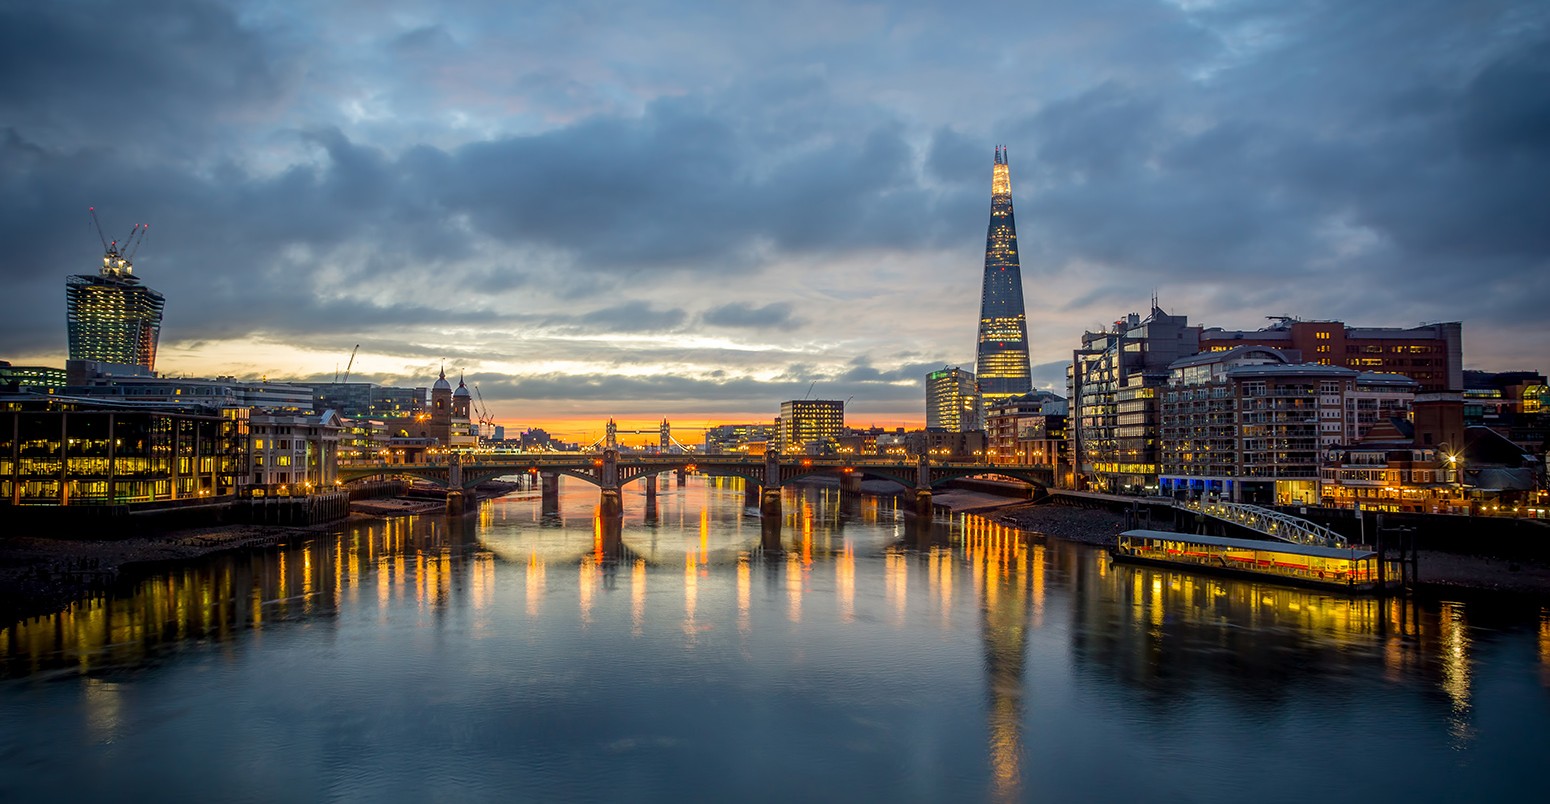 A view of the London skyline from the Millennium Bridge